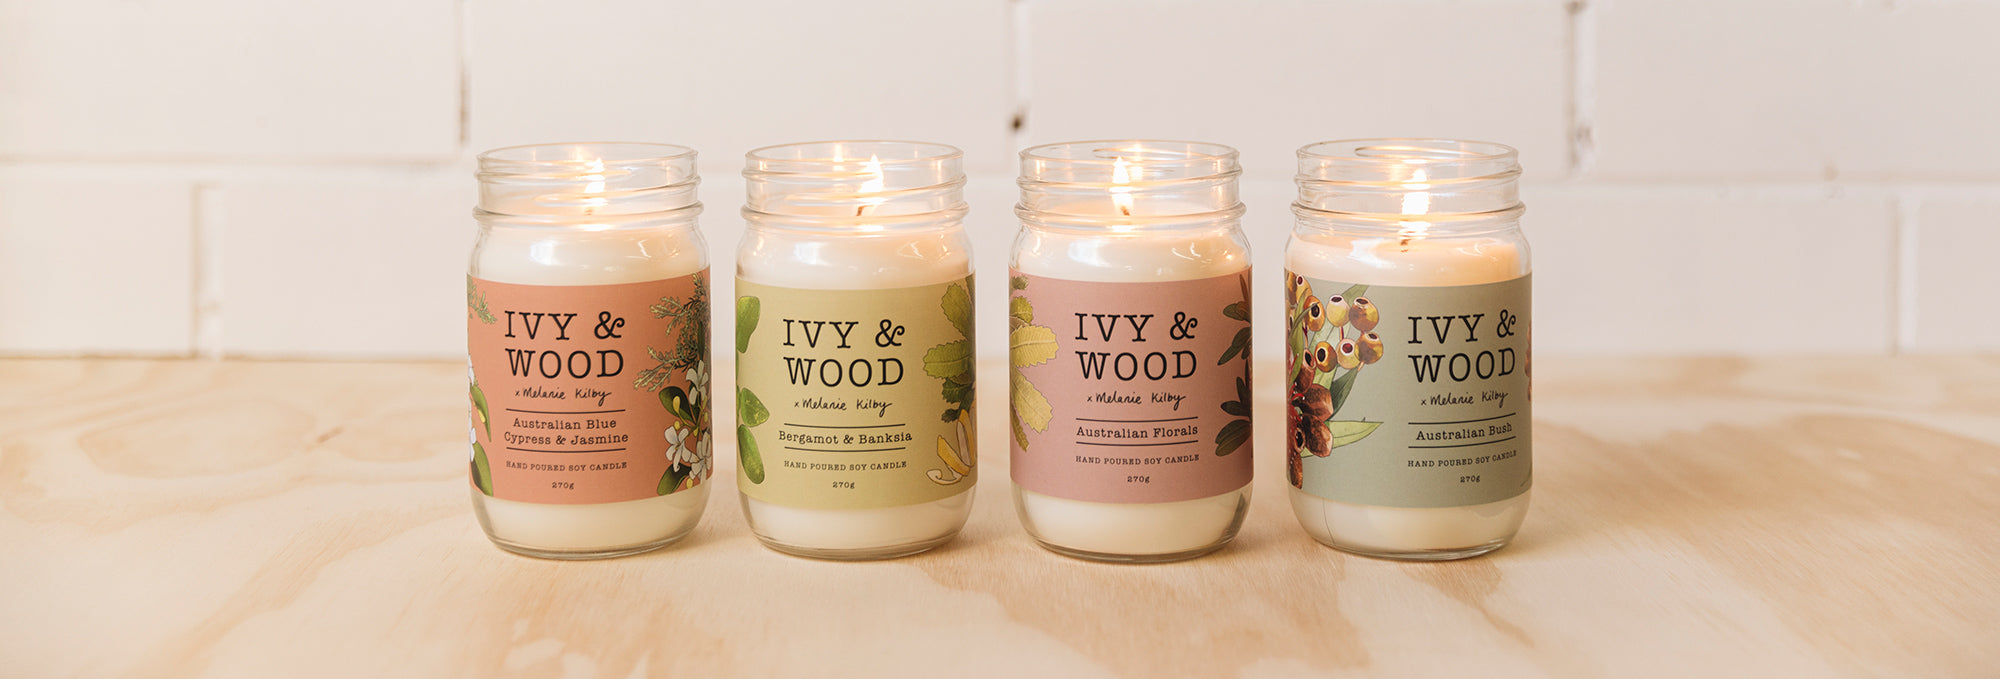 Ivy & Wood candles